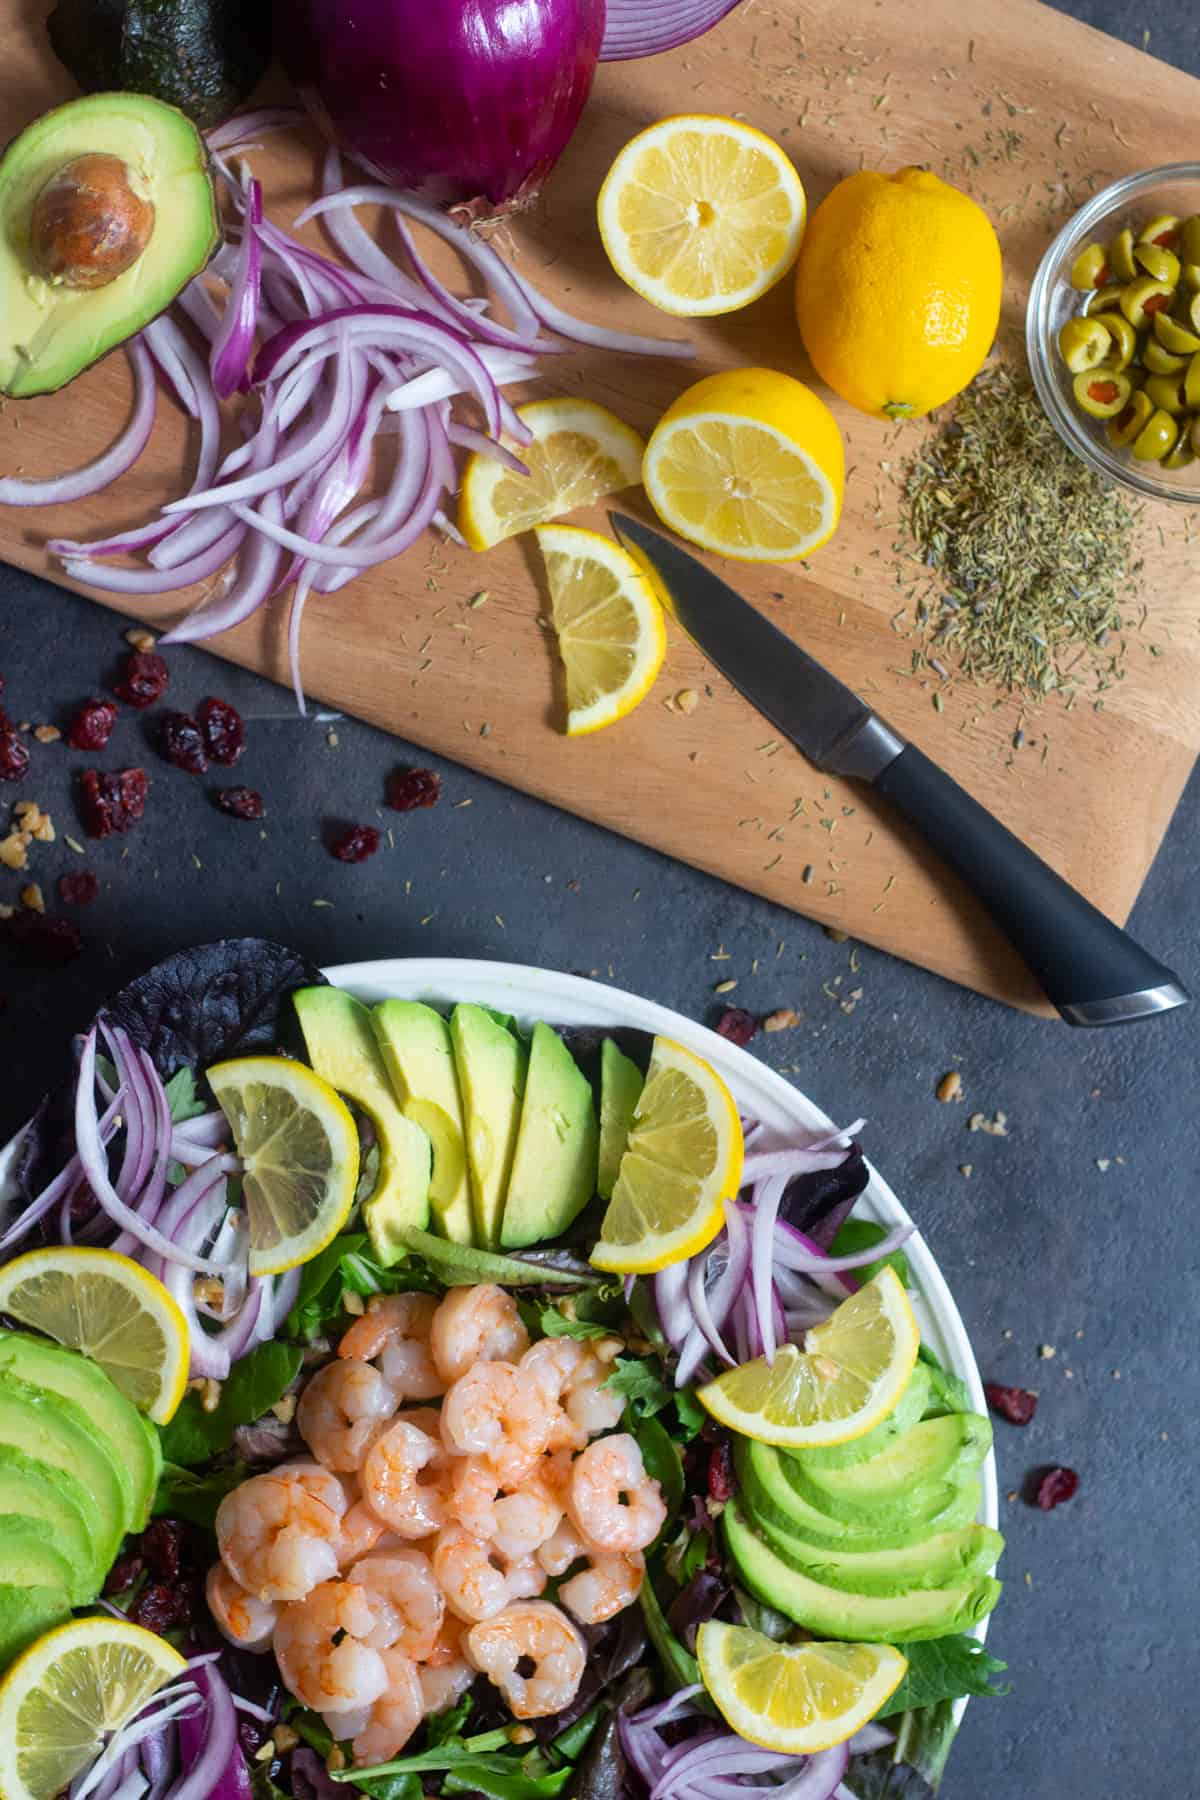 This is The Best Shrimp Avocado Salad you will ever try. Delicious juicy shrimps mixed with fresh greens and soft avocados with a drizzle of a terrific sauce make the perfect salad!